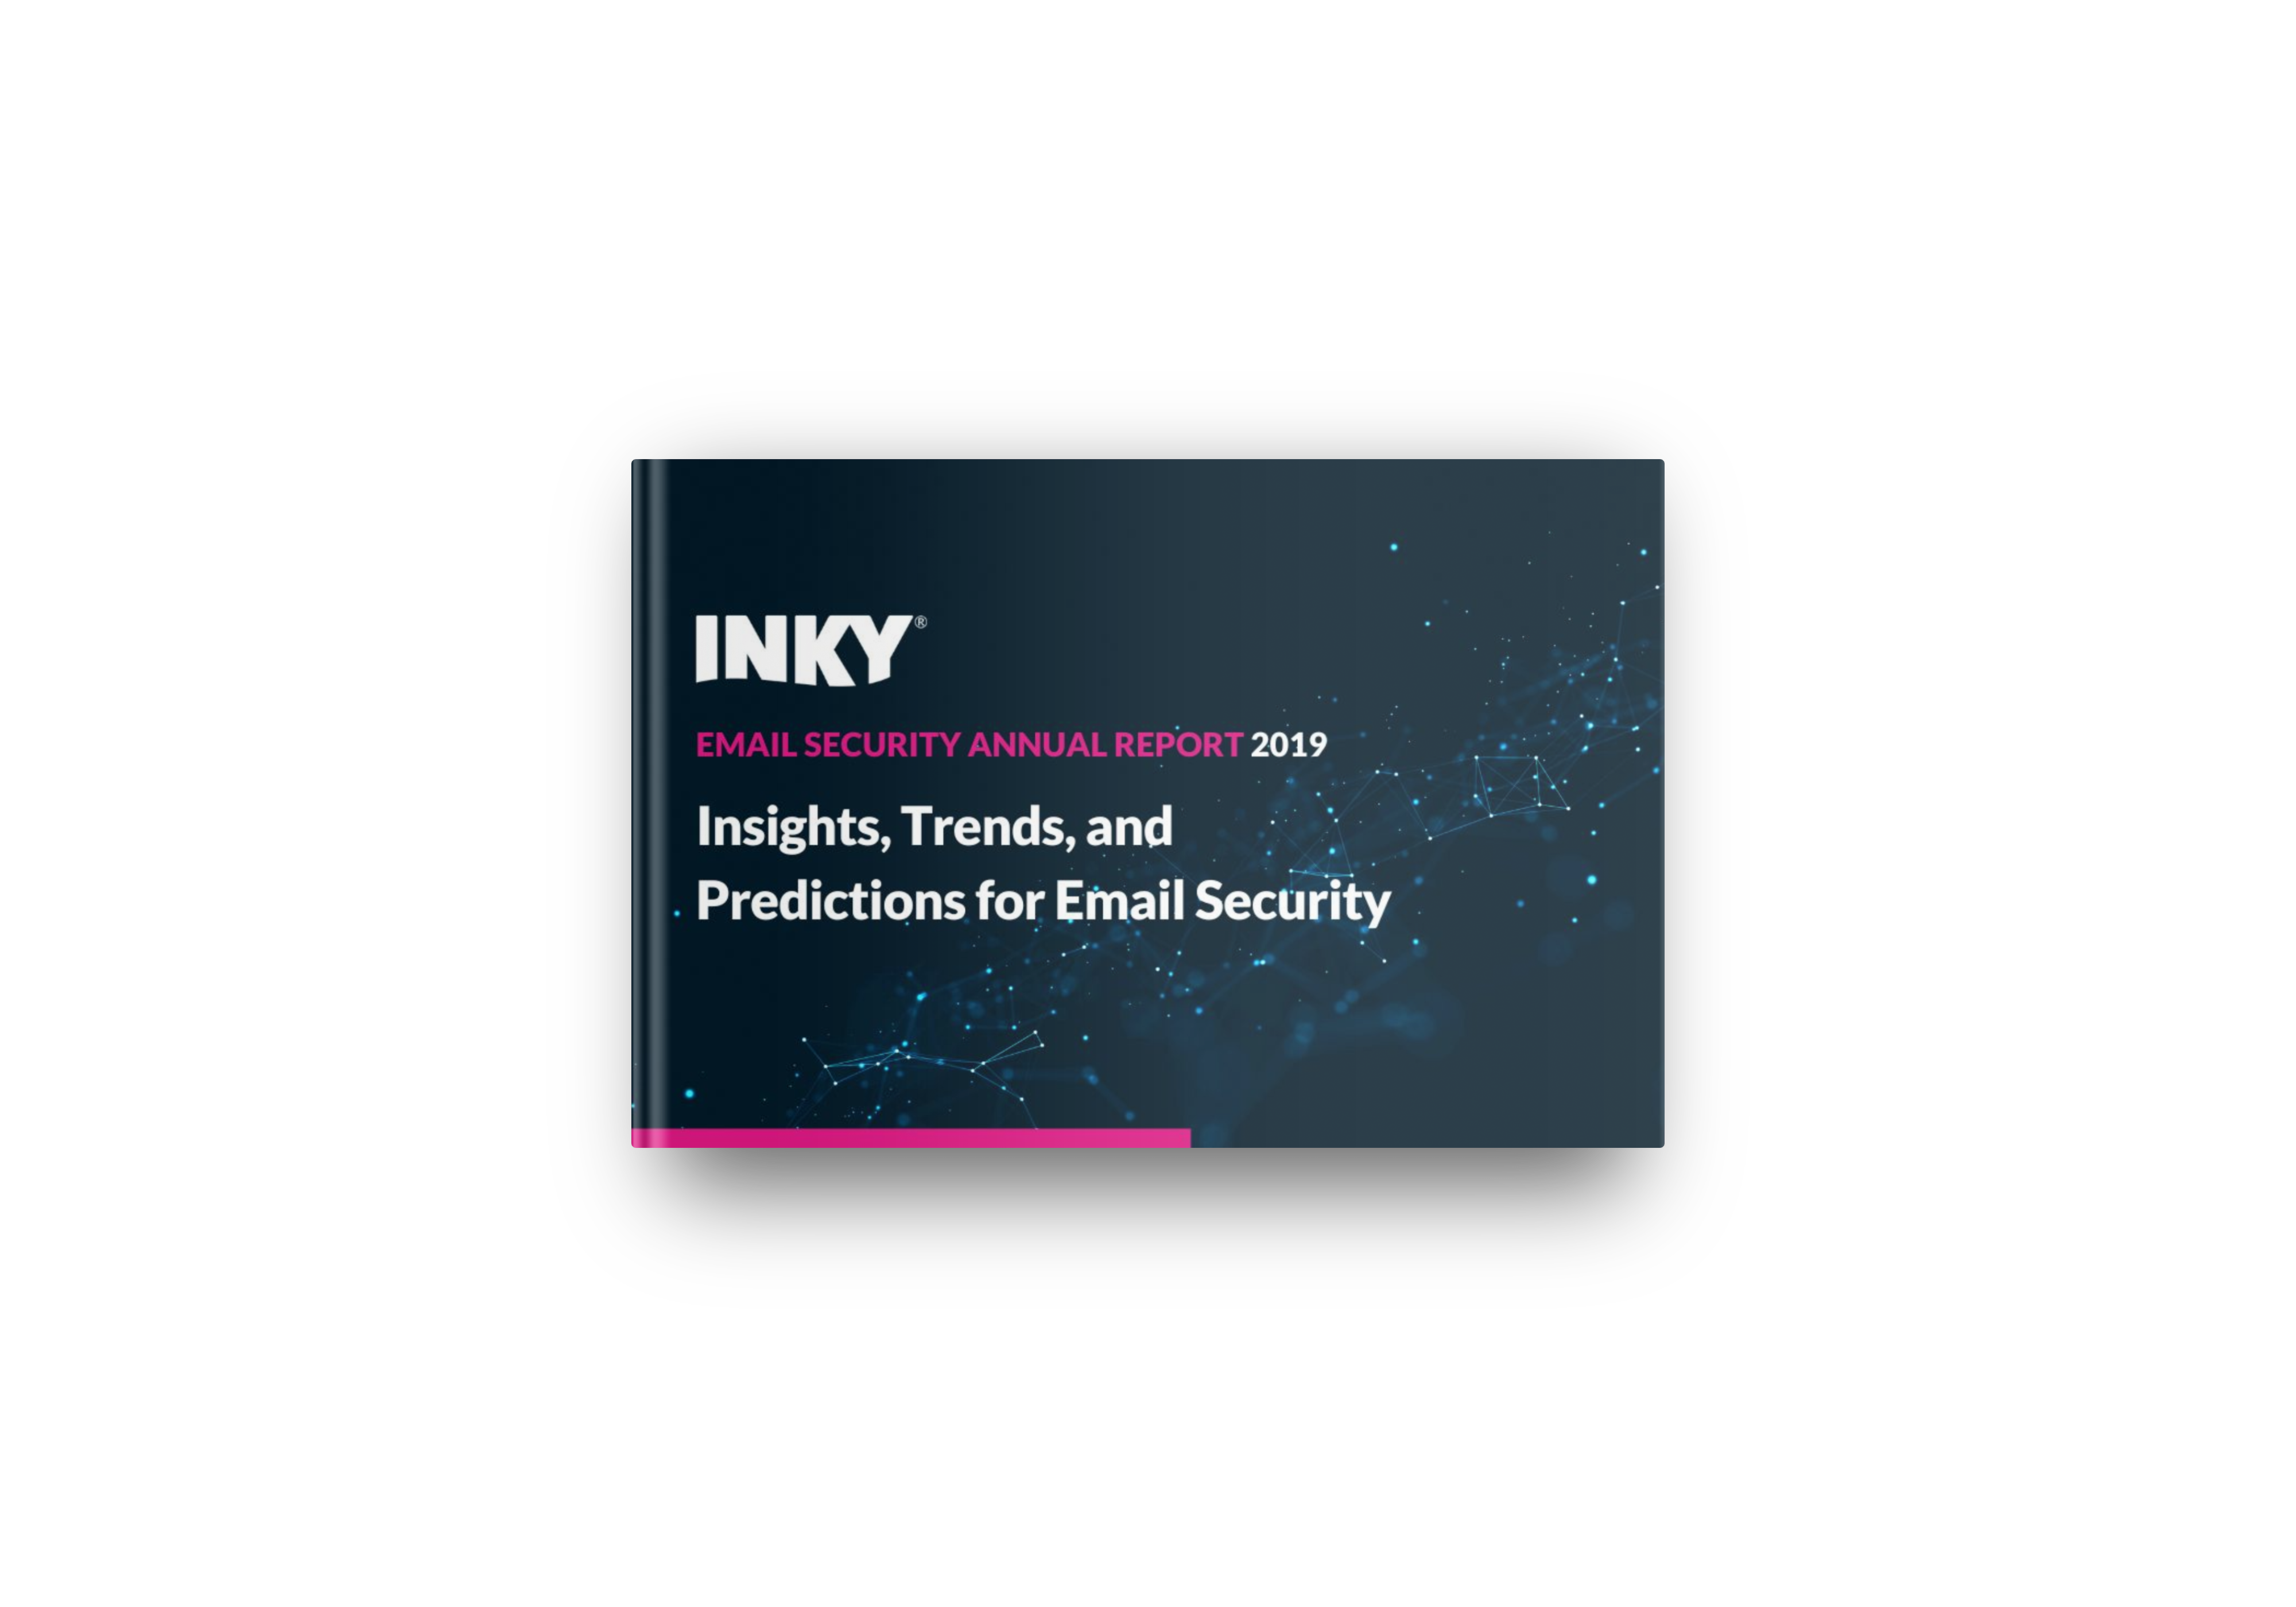 INKY’s 2019 Email Security Report